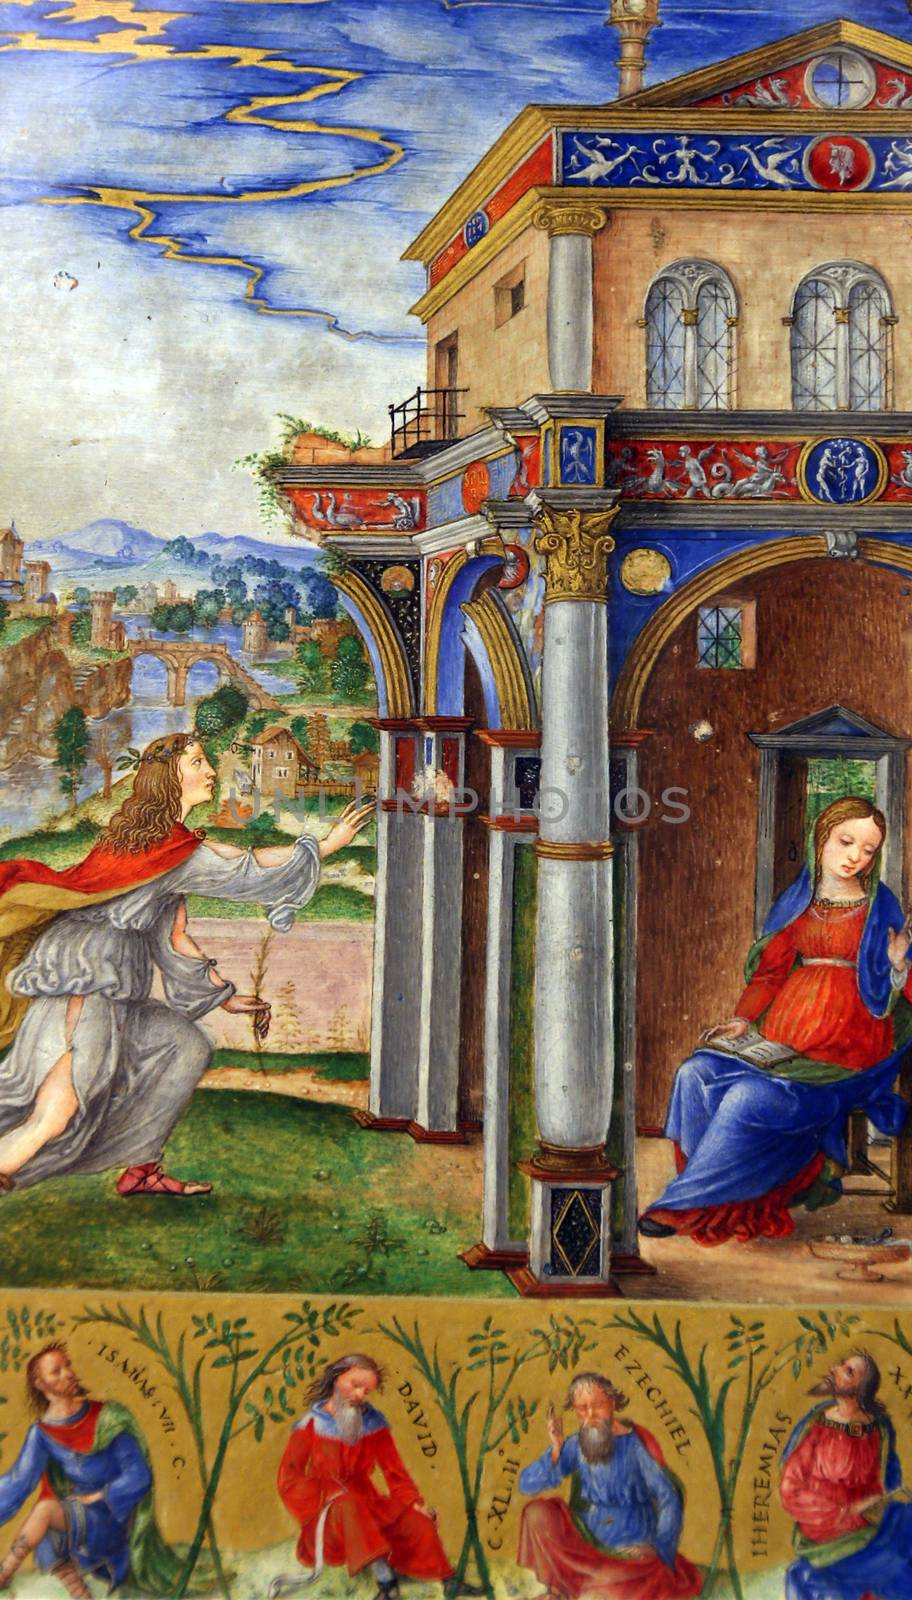 Matteo da Milano: miniatures from the breviary of Alfonso I d'Este: Annunciation of the Virgin Mary, Old Masters Collection, Croatian Academy of Sciences in Zagreb, Croatia